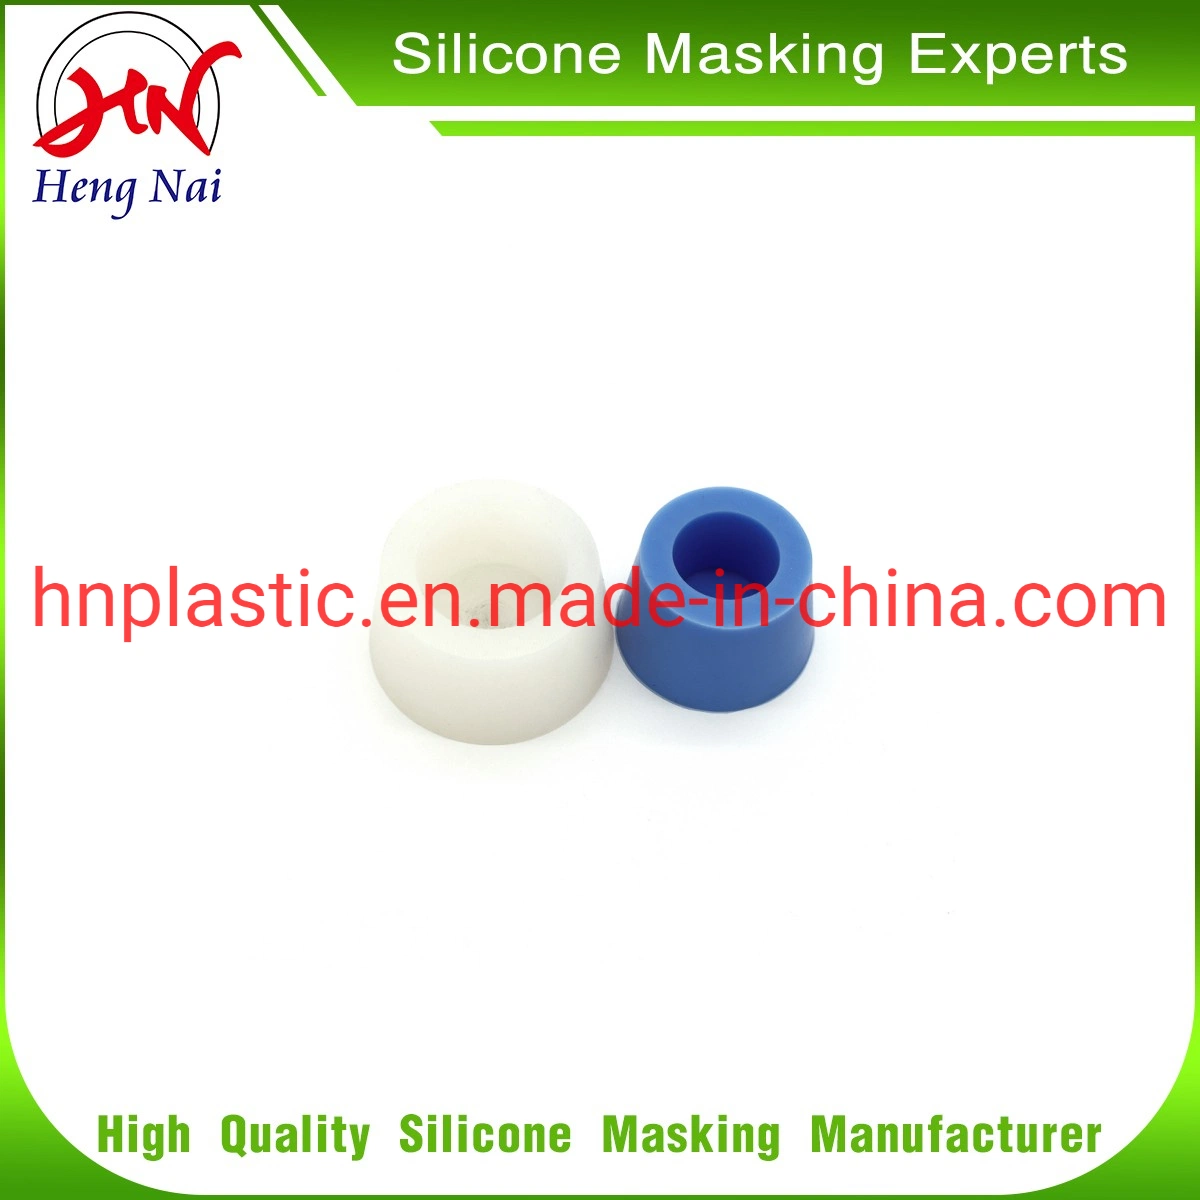 Silicone Parts/Custom Molded Silicone Part/Rubber Sealing Parts